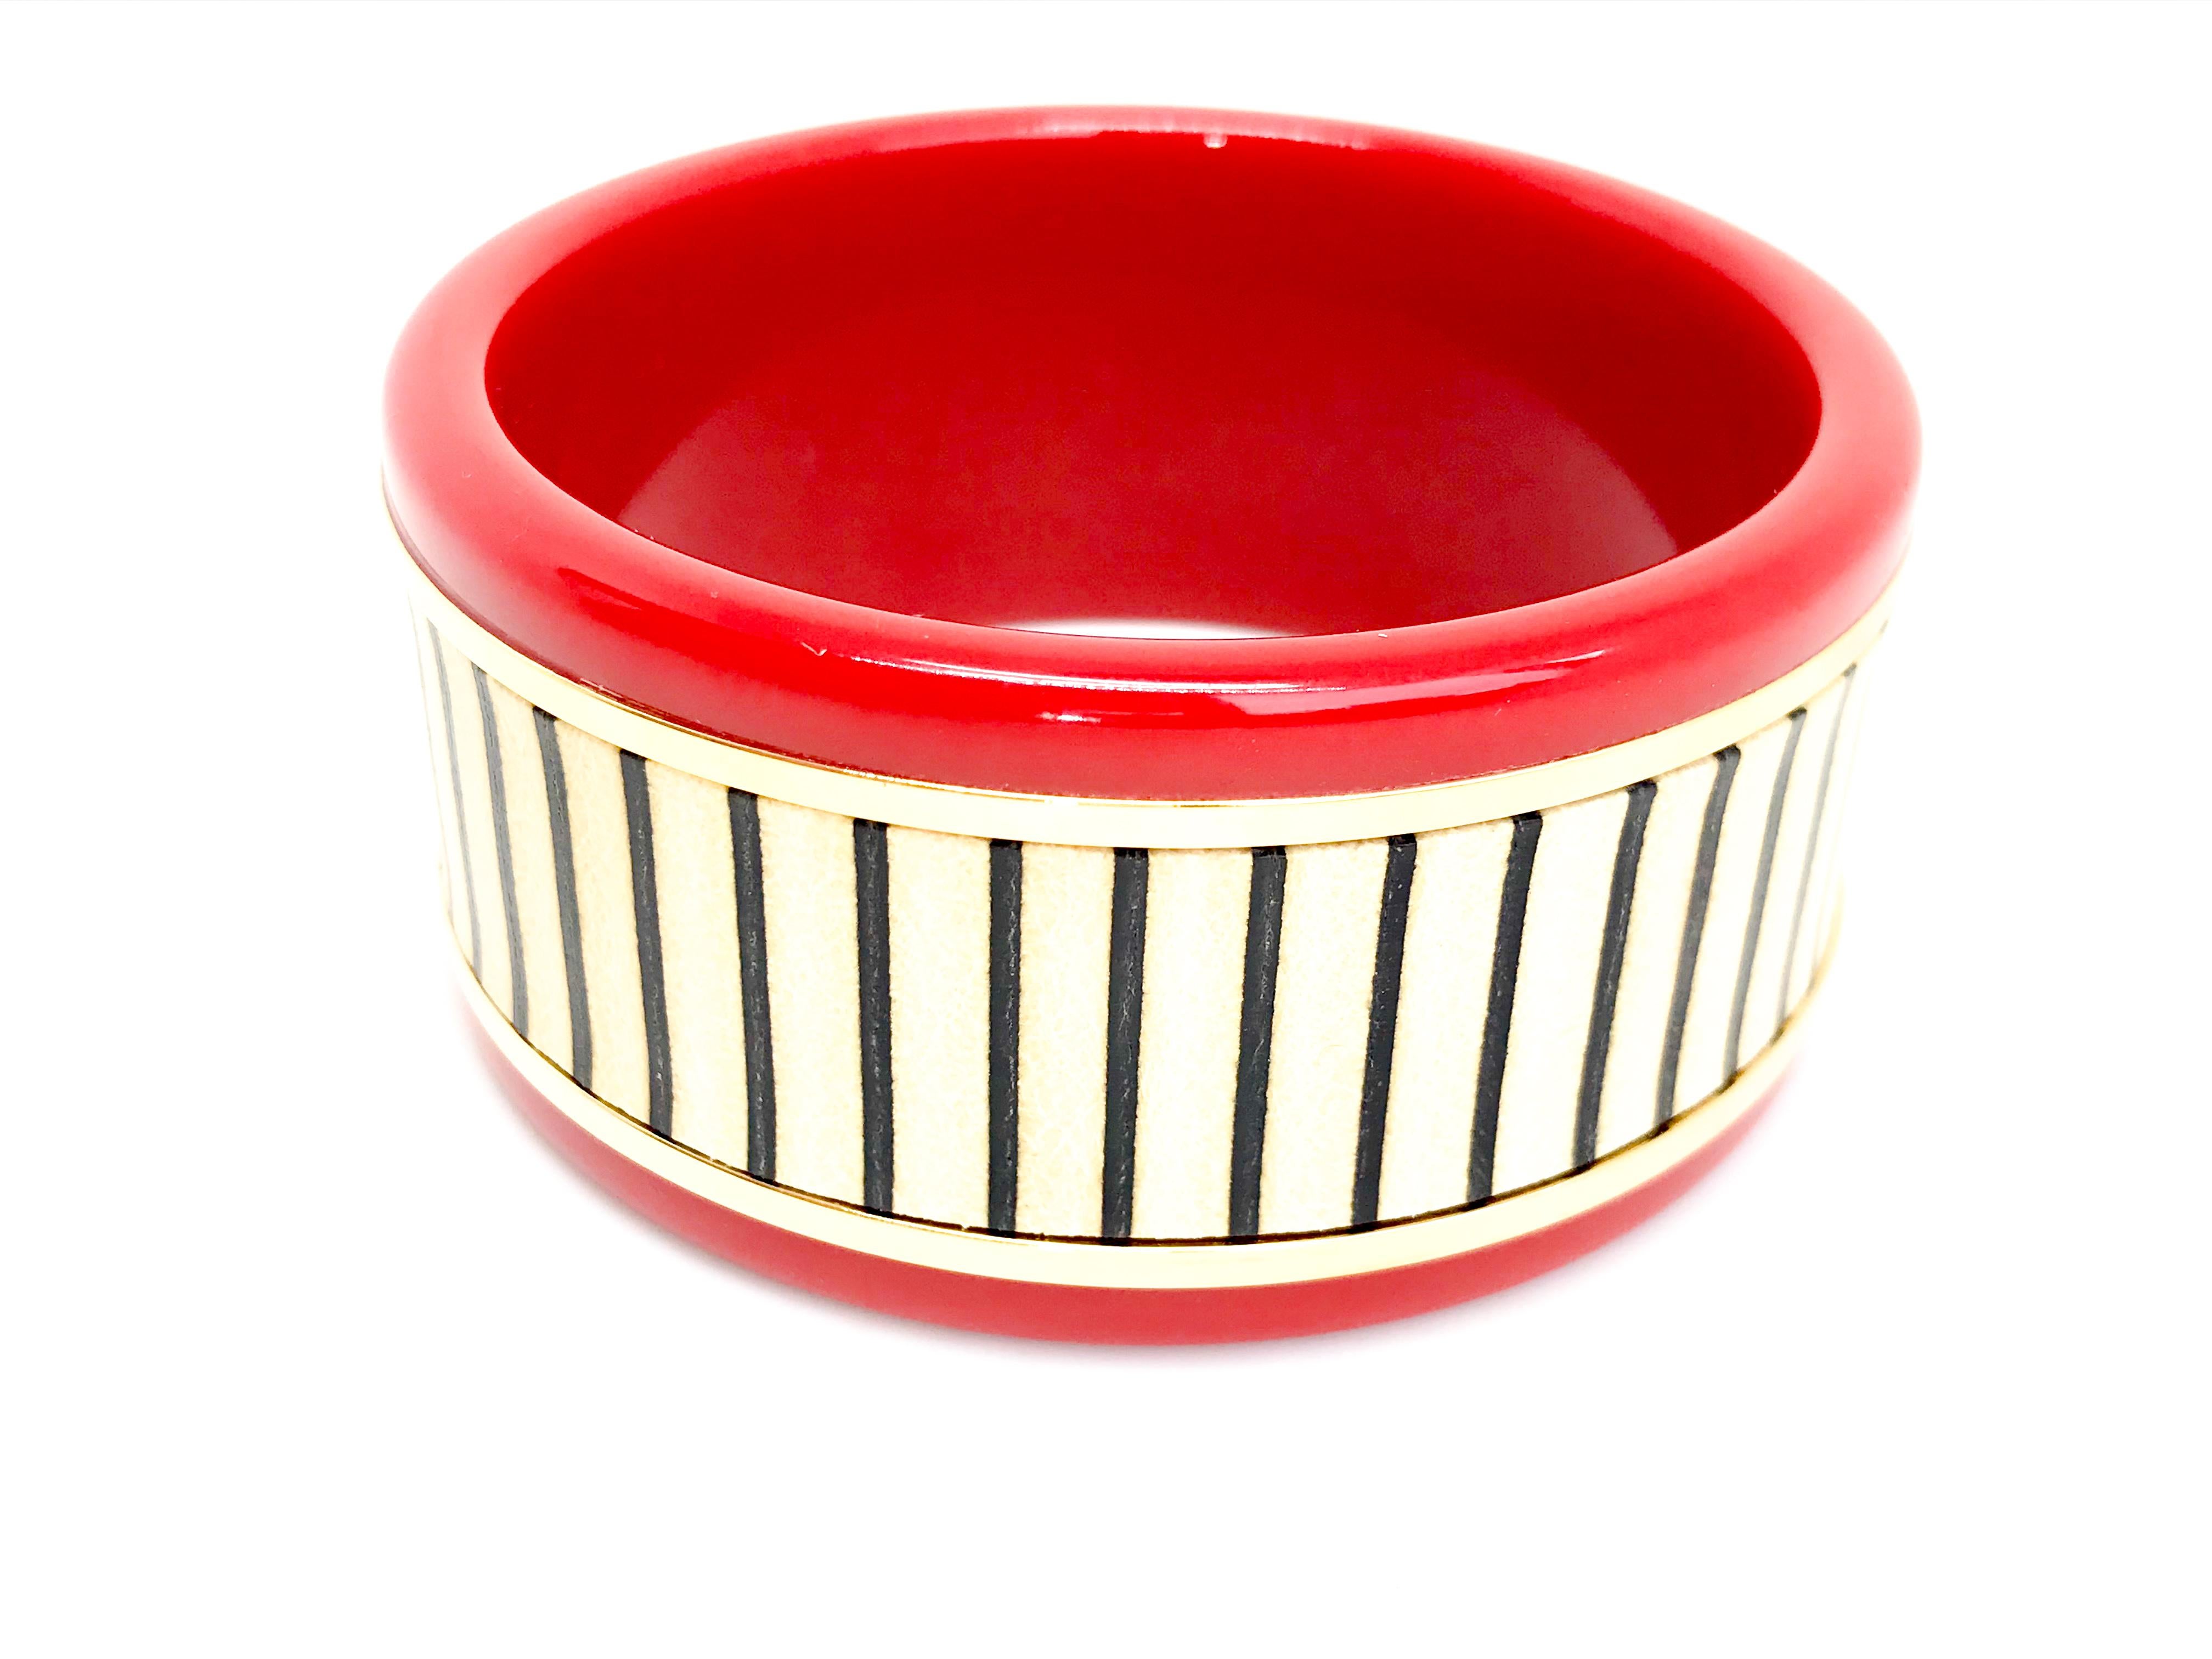 Red resin Fendi bangle featuring striped vitello leather inlaid into gold tone metal featuring Fendi signature.  Stamped made in Italy inside.

As featured on Fendi runway.  Please message me for photo of this as too small to upload to site.

Can be